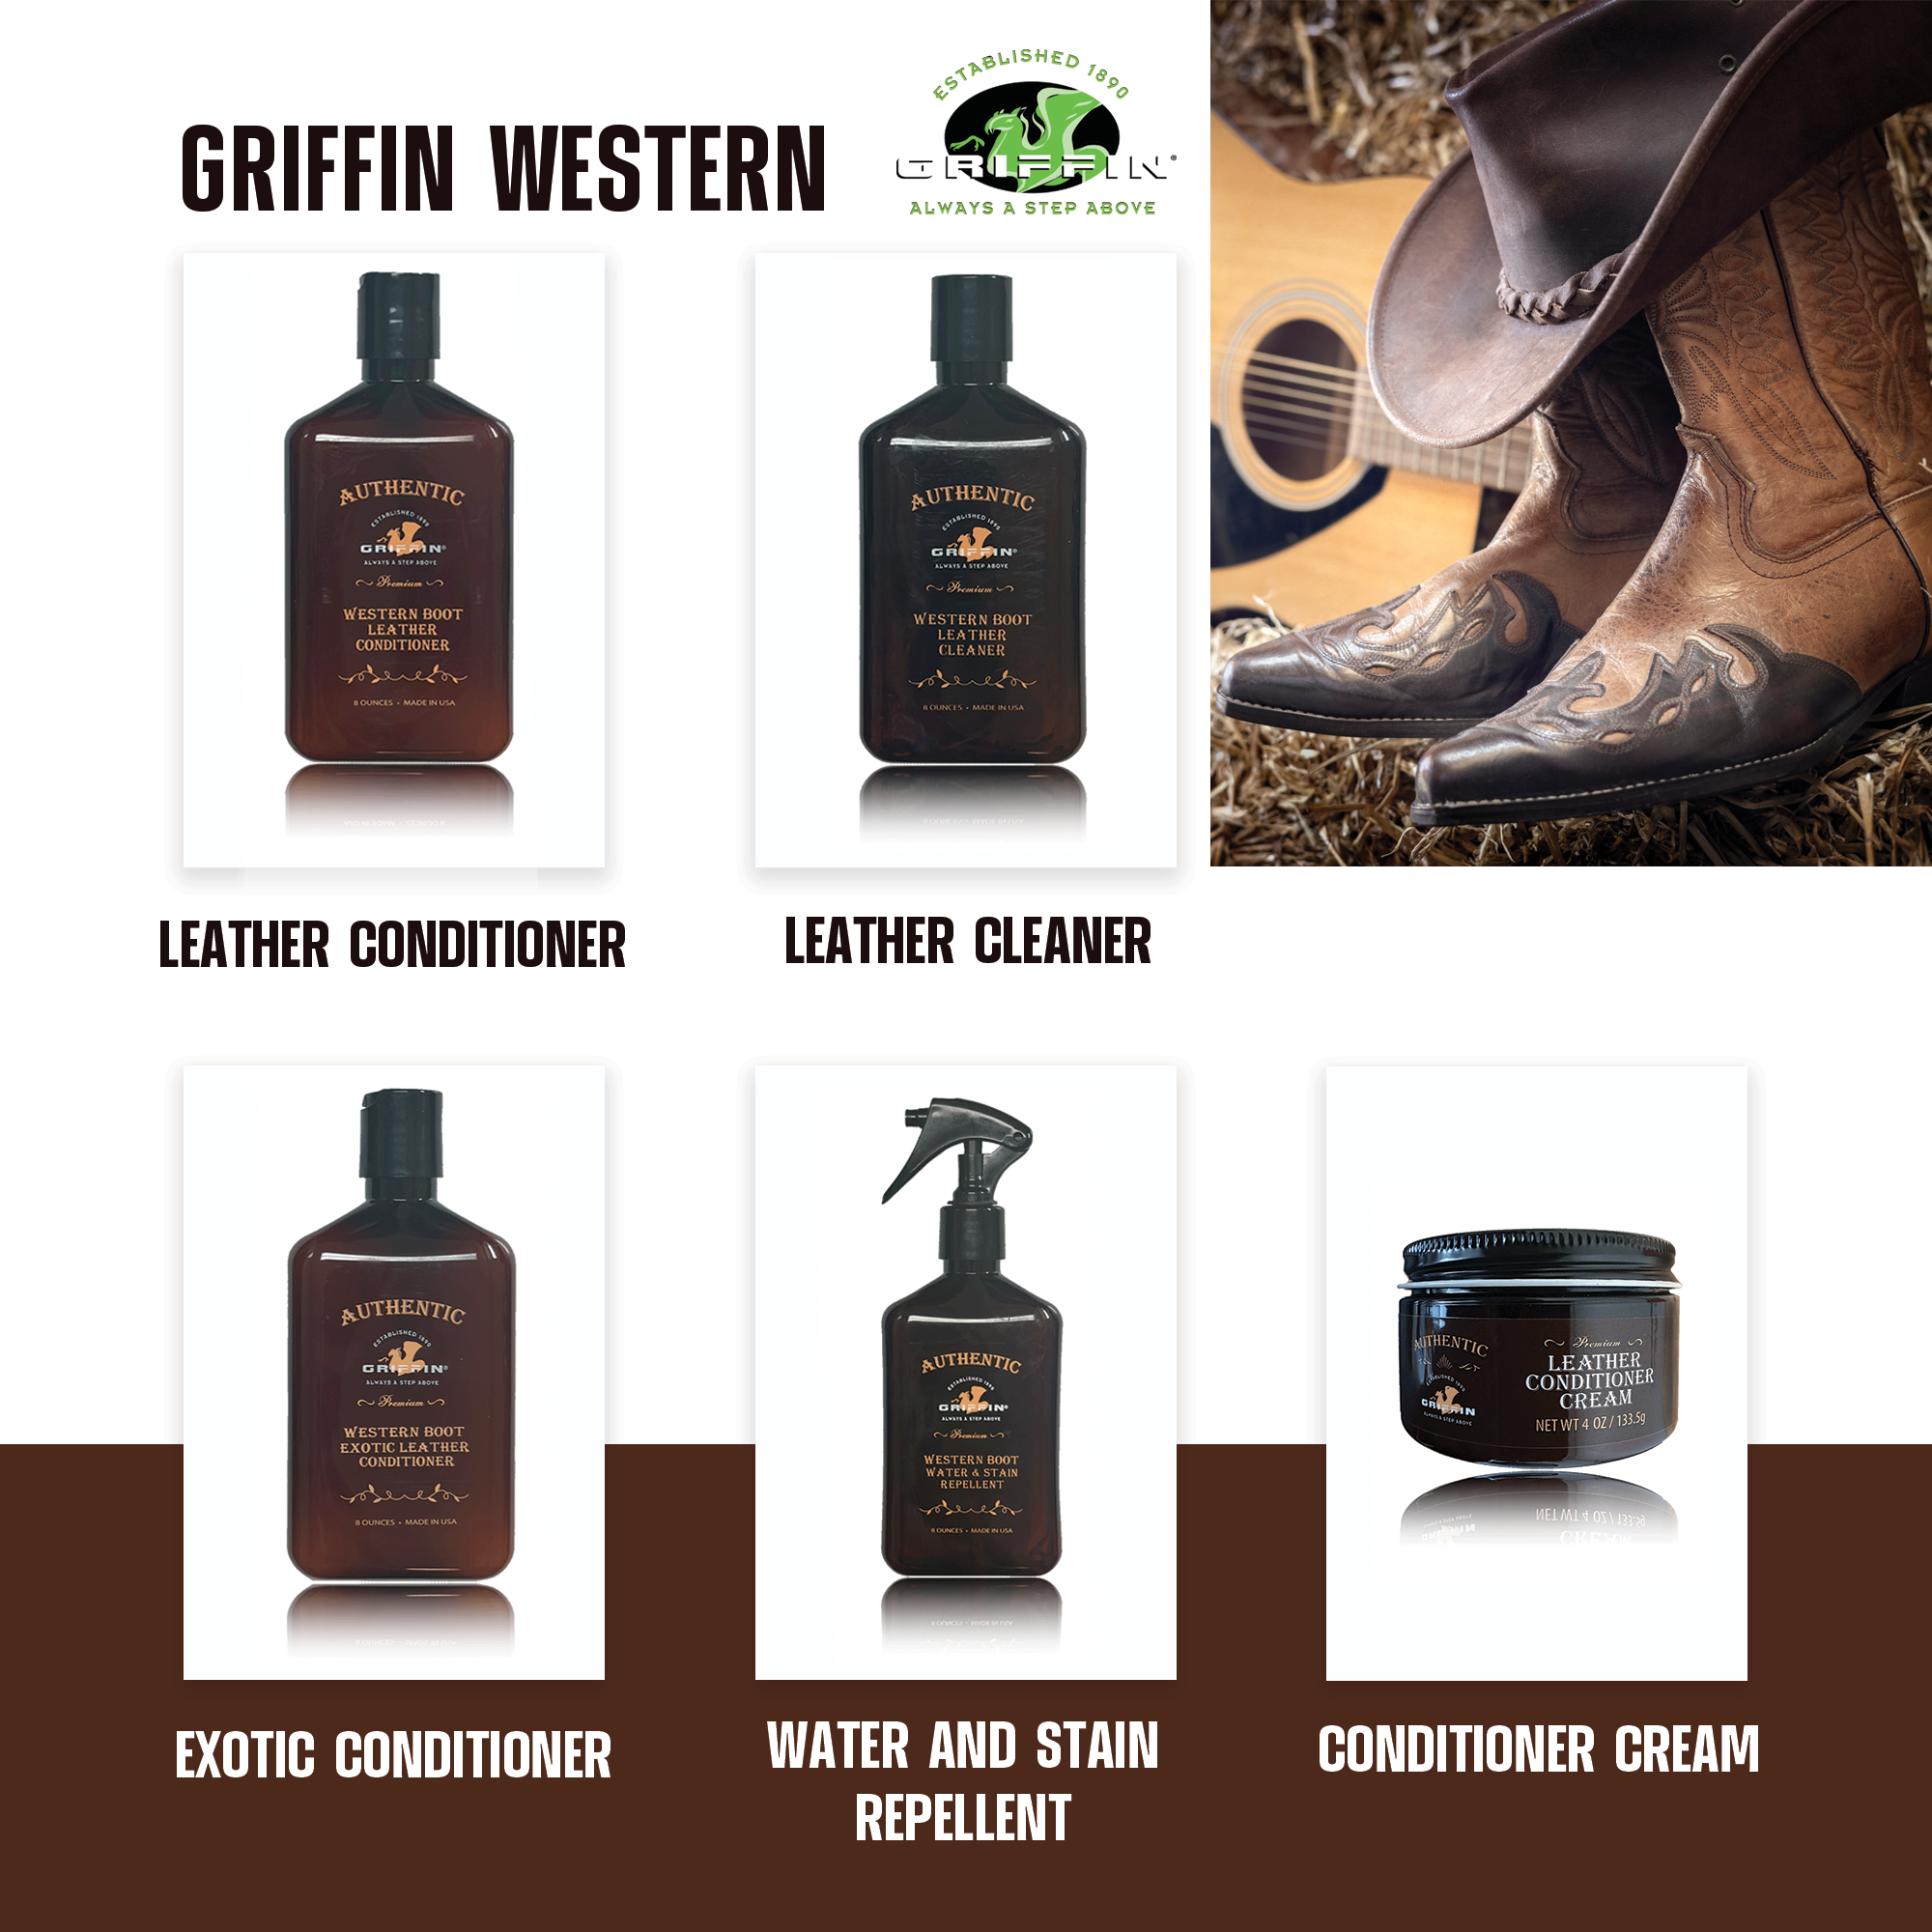 Western Boot Leather Conditioner